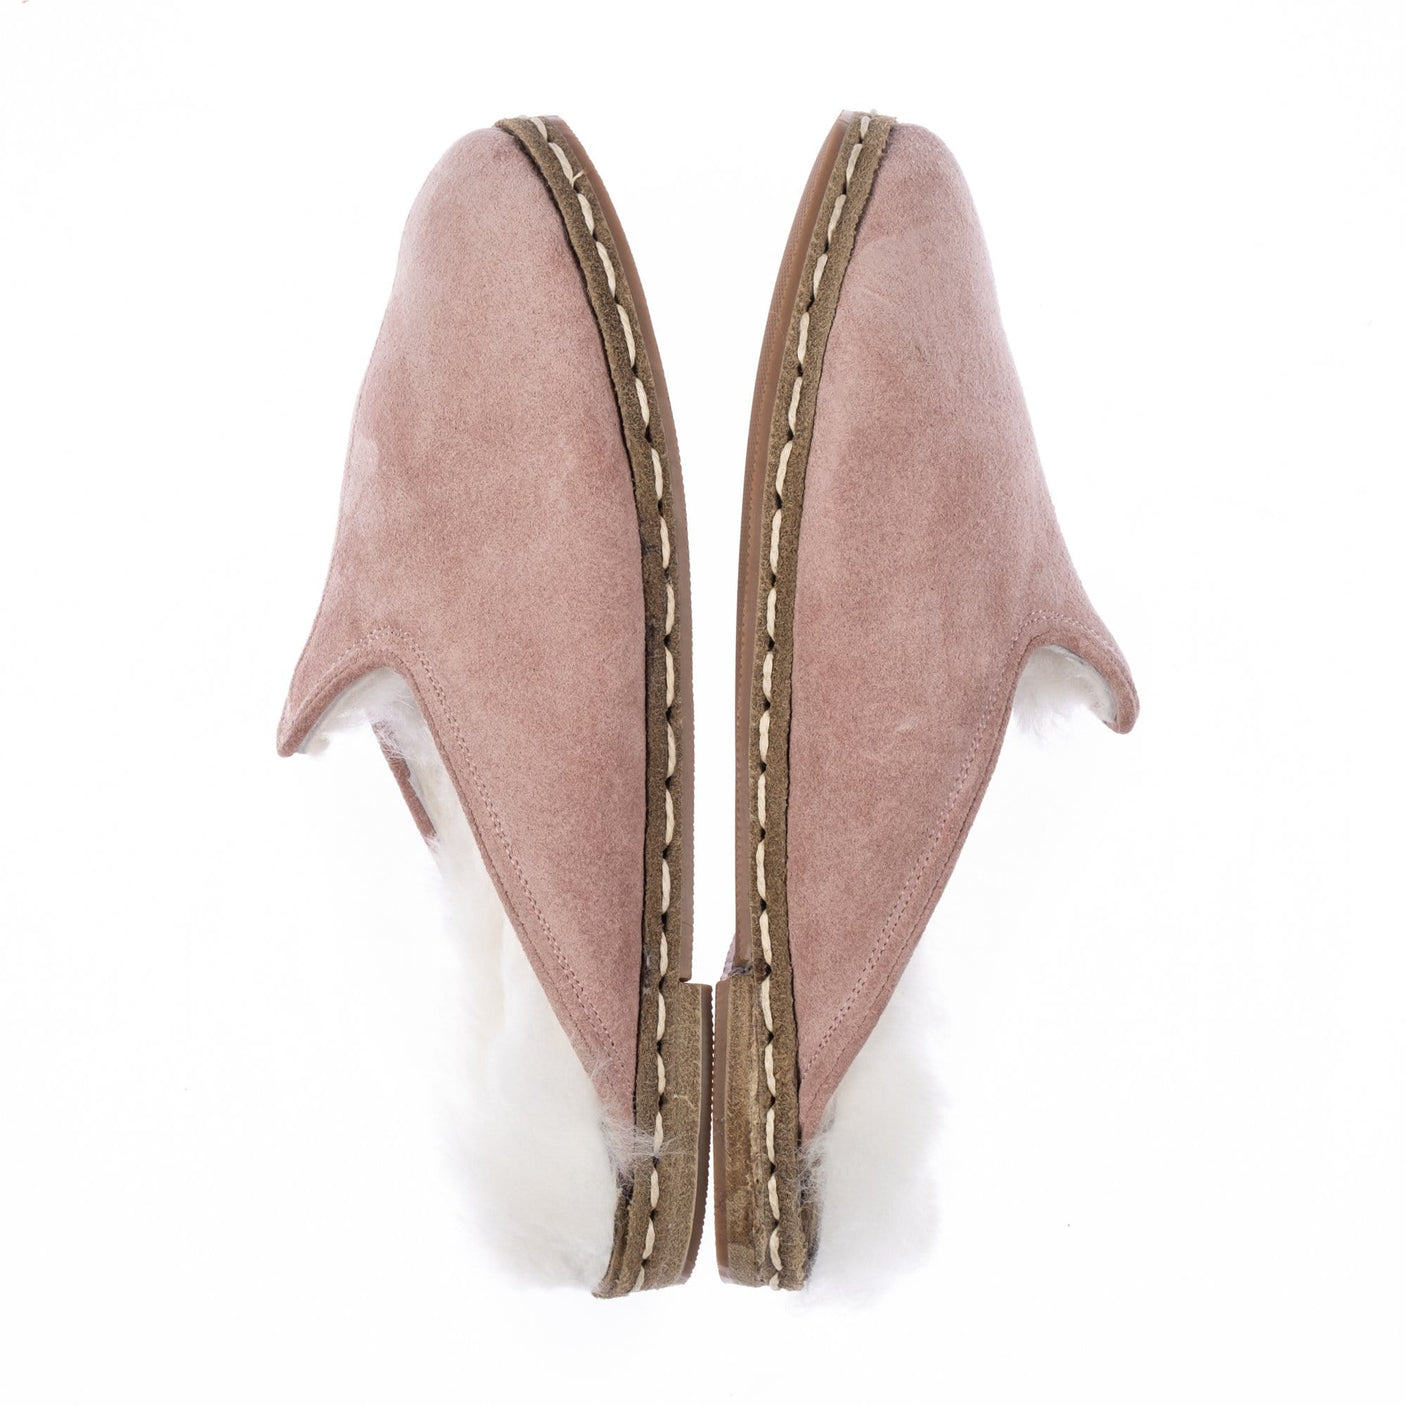 Men's Pink Suede Shearling Slippers